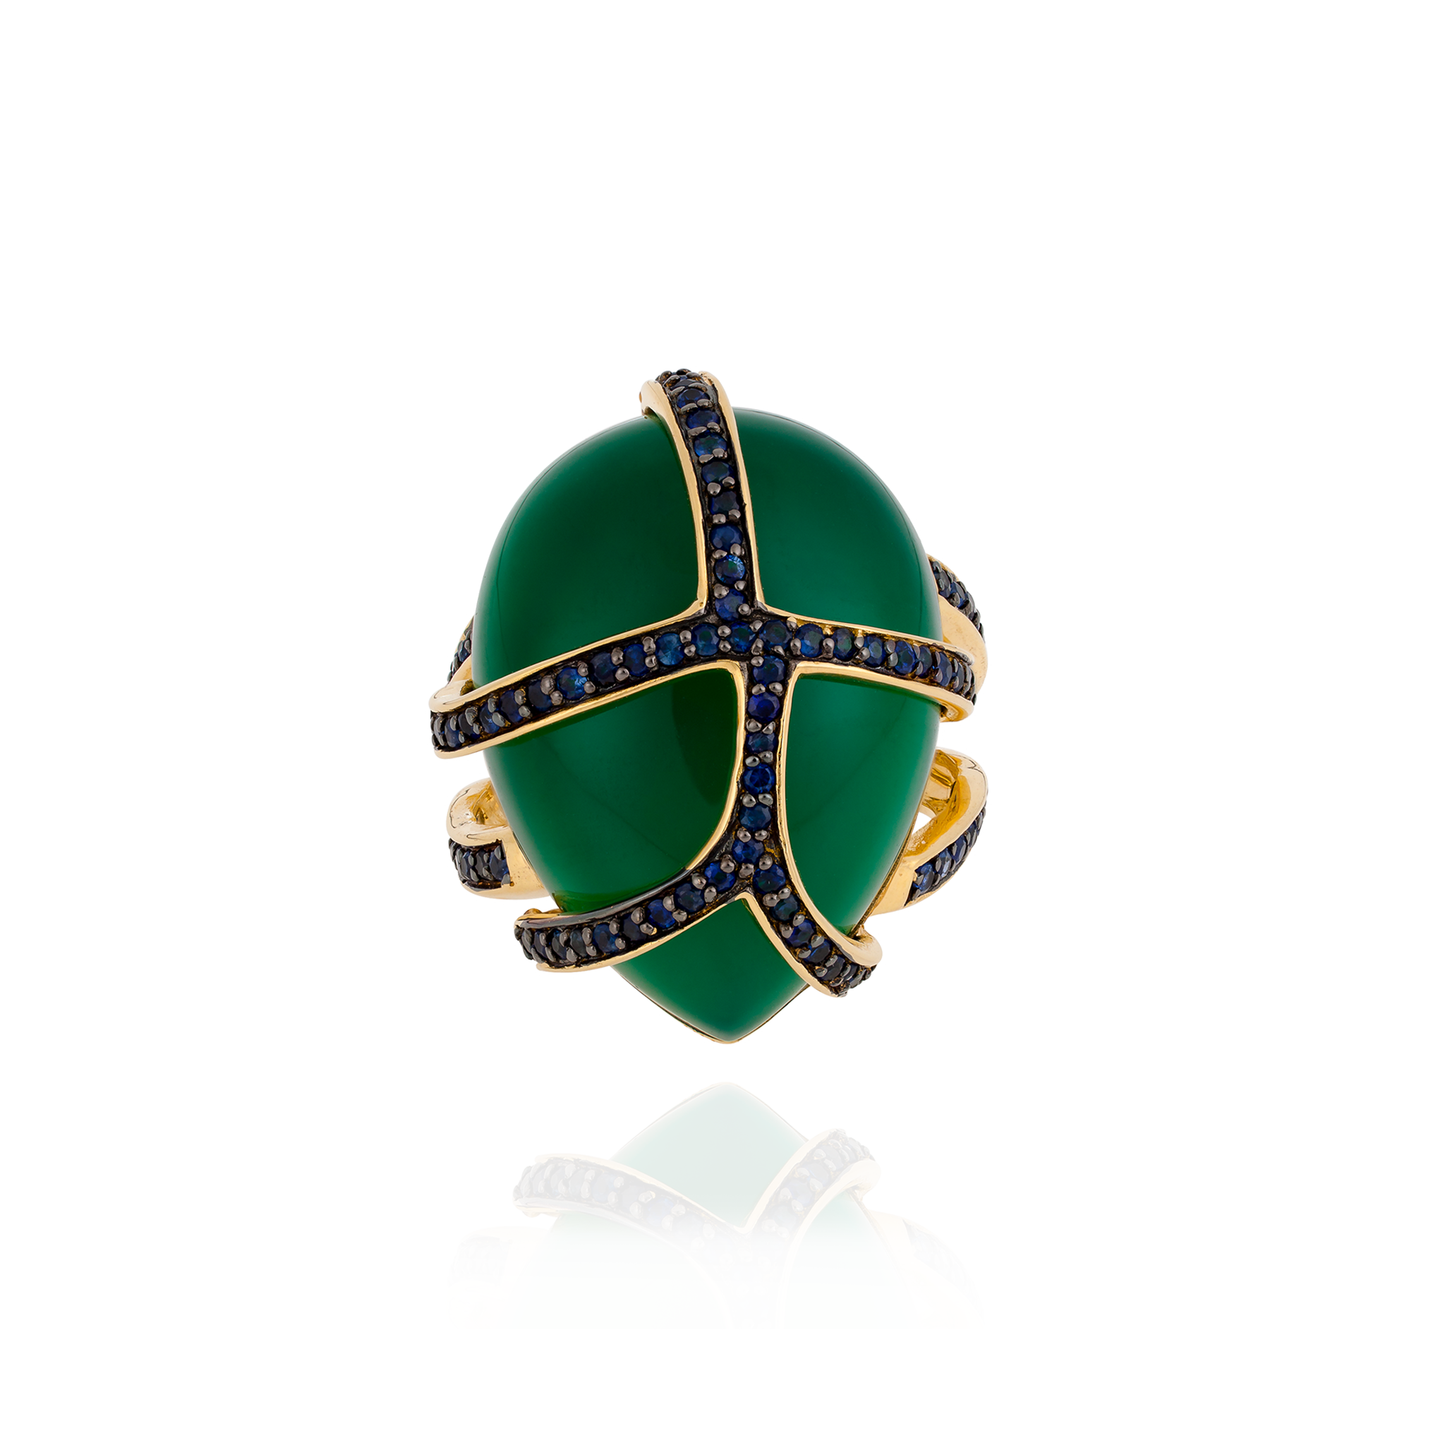 18K Yellow Gold Ring with Green Onyx Cabochon